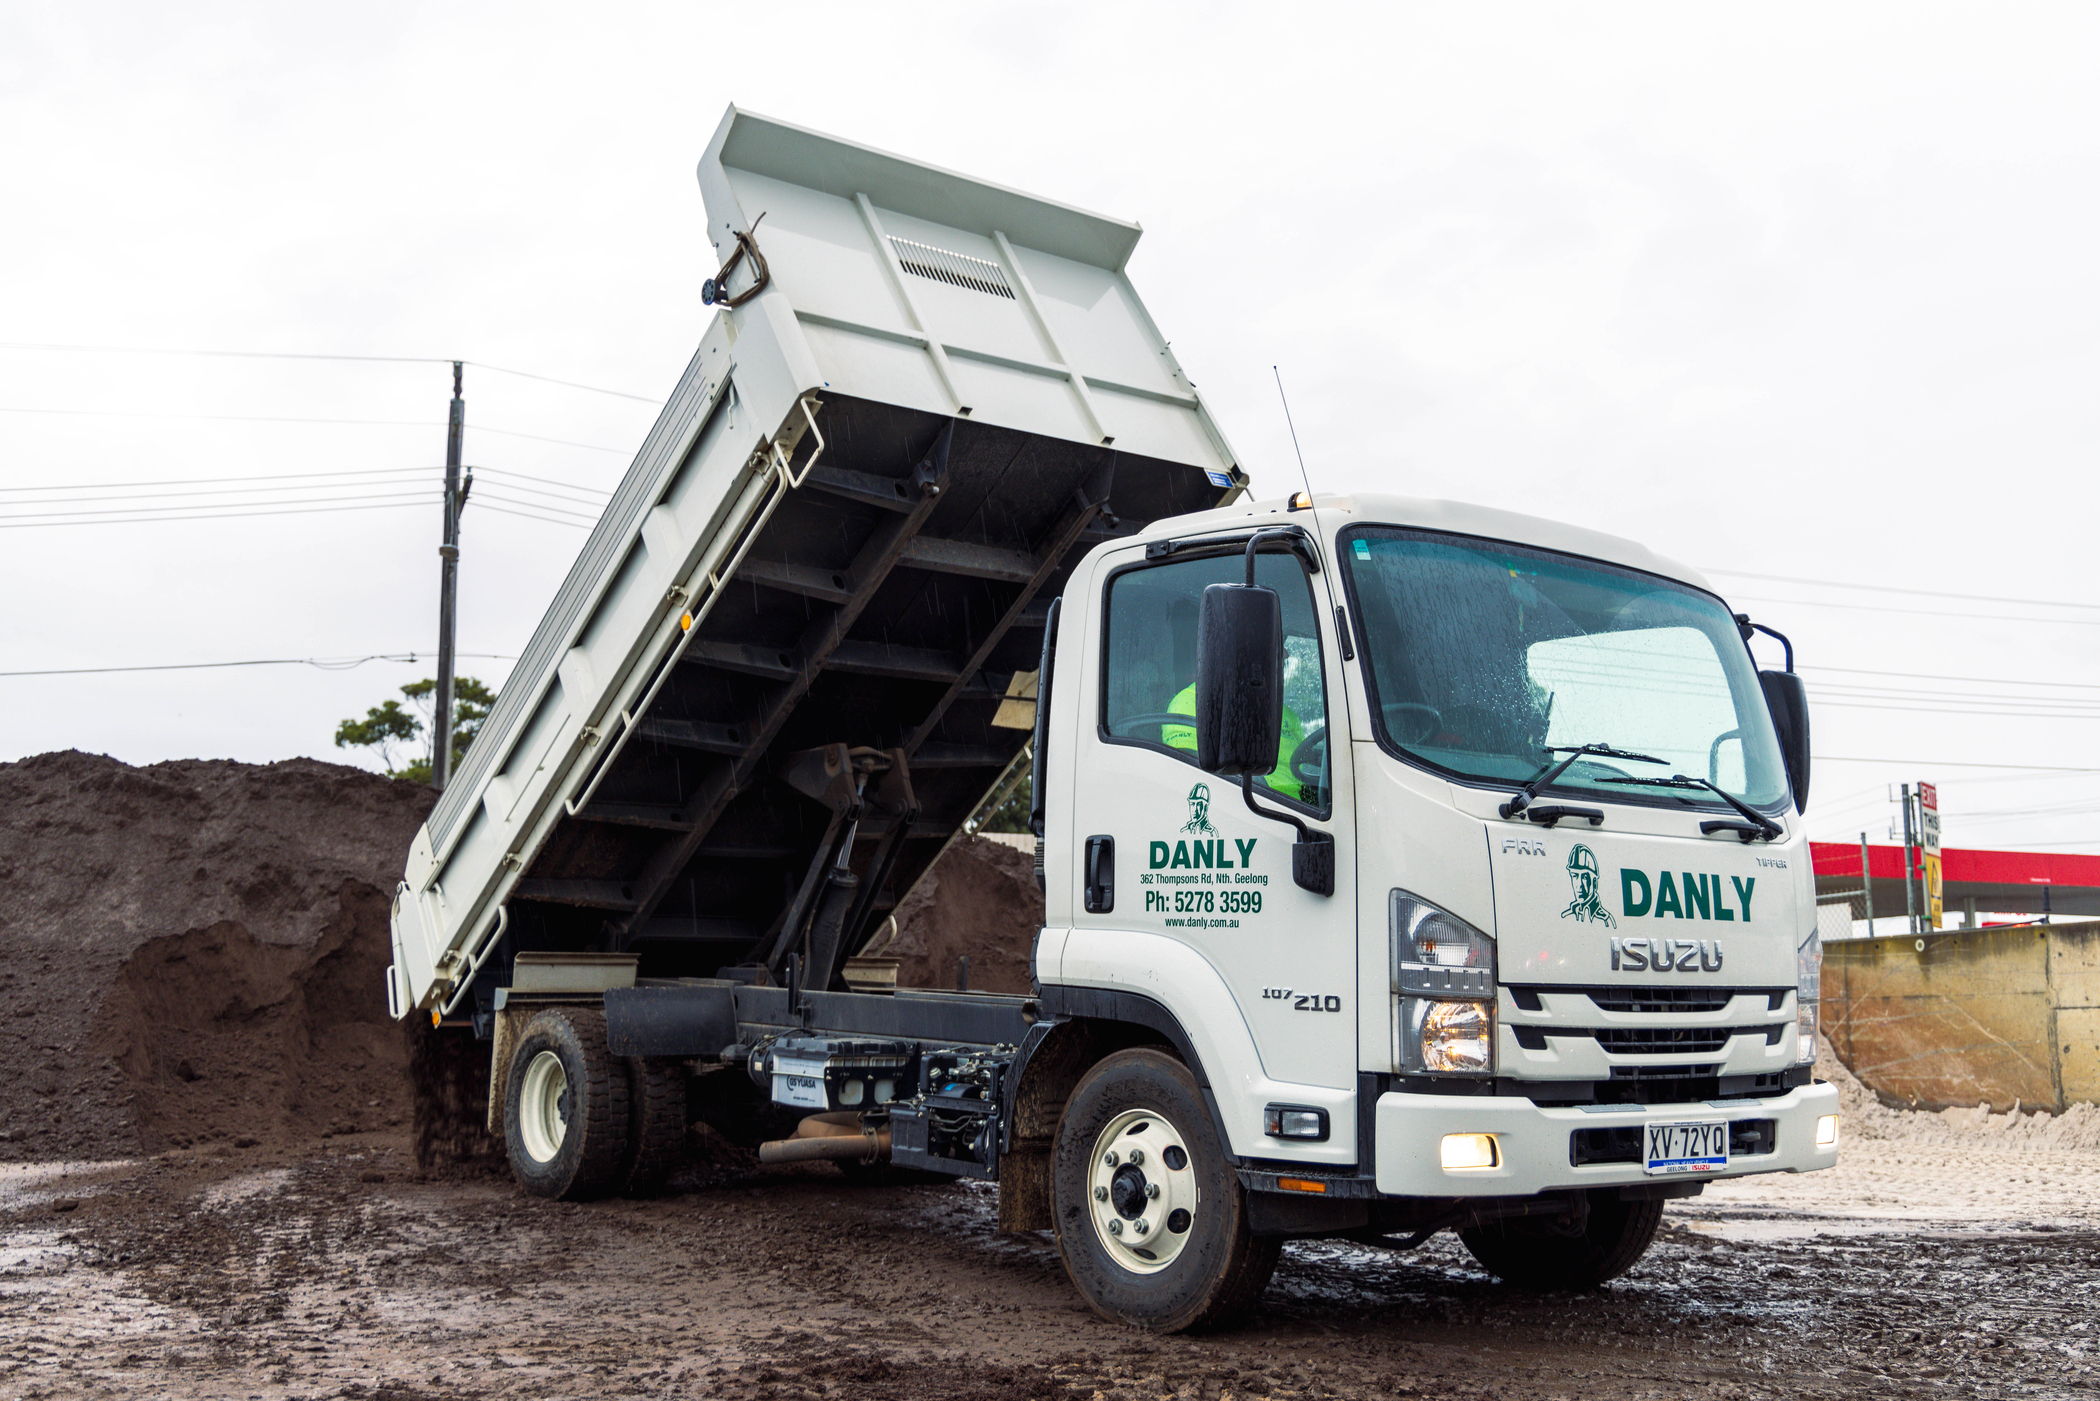 The Danly FRR 107-210 Tipper in action